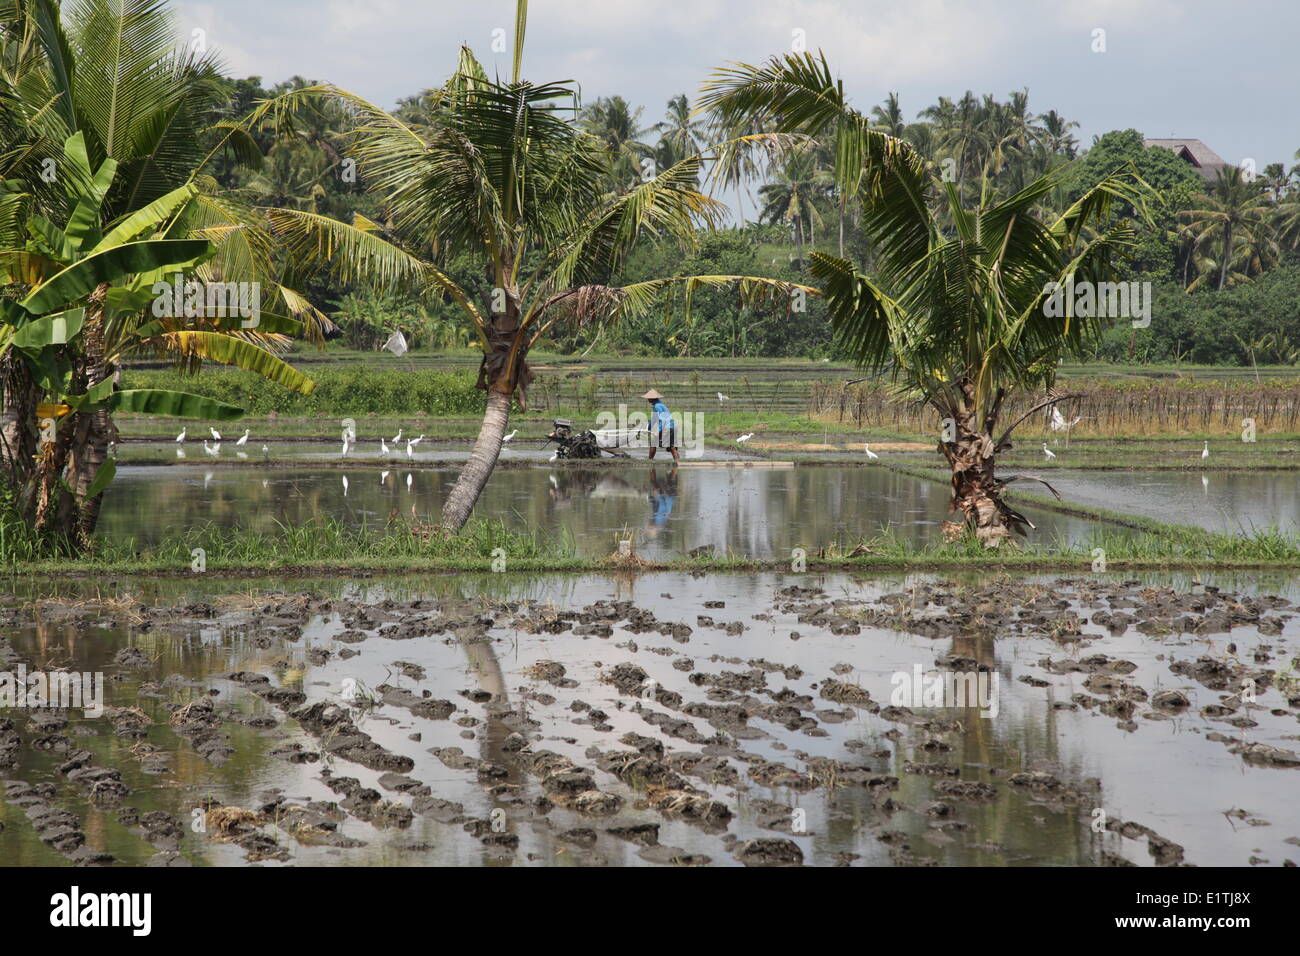 A farmer ploughing a rice field in Bali, Indonesia, May 2, 2014. Rice terraces and fields are a common image of the Indonesian countryside landscape. (CTK Photo/Karel Picha) Stock Photo